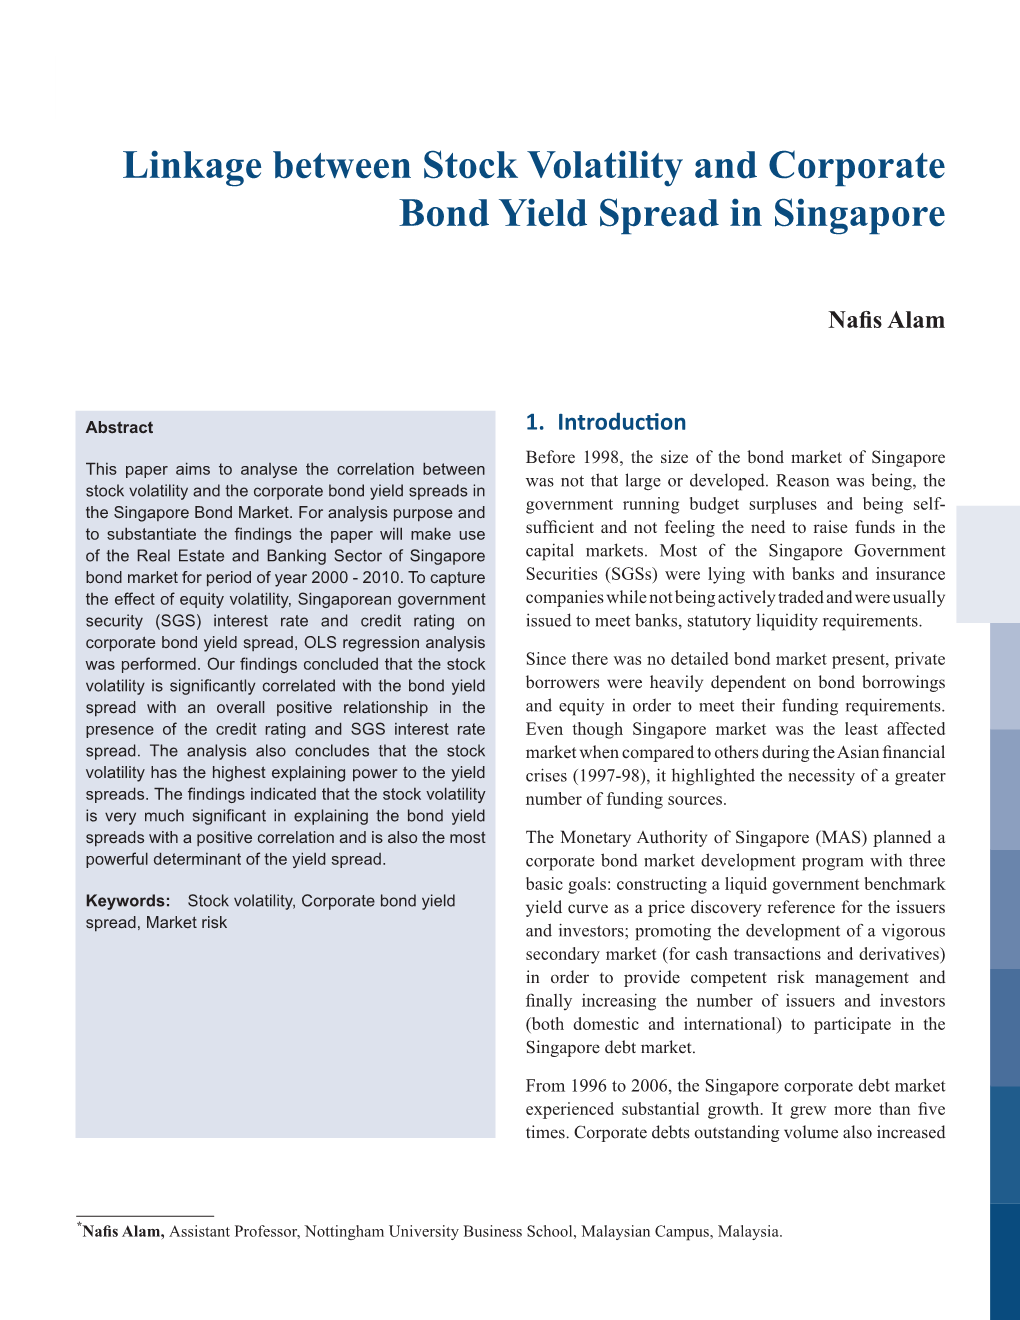 Linkage Between Stock Volatility and Corporate Bond Yield Spread in Singapore 1